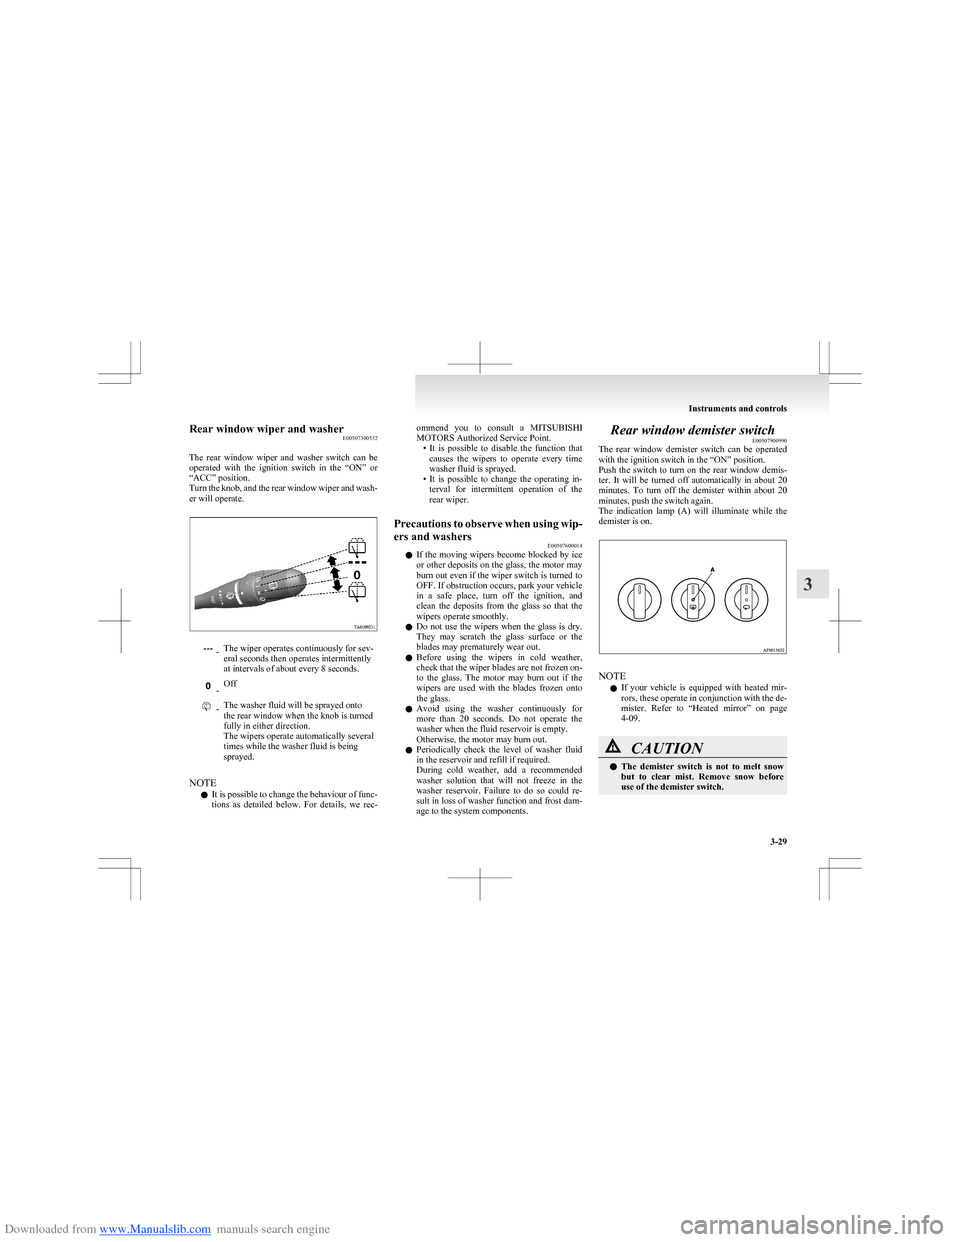 MITSUBISHI COLT 2009 10.G Owners Manual Downloaded from www.Manualslib.com manuals search engine Rear window wiper and washerE00507300532
 
The  rear  window  wiper  and  washer  switch  can  be
operated  with  the  ignition  switch  in  th